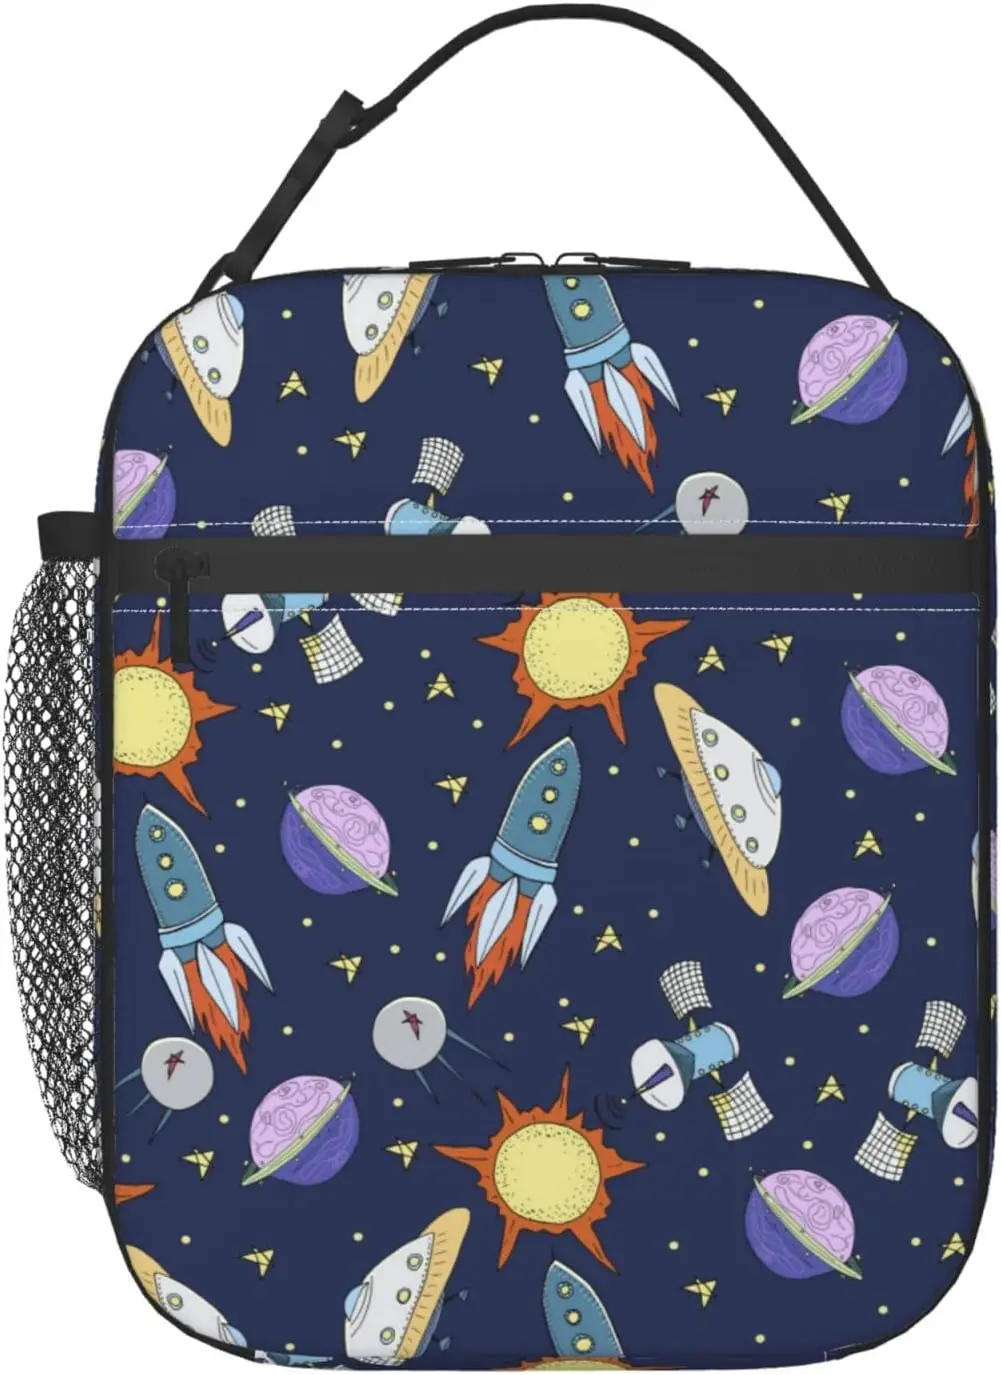 

Stars Planet Spaceship Rocket Lunch Bag for Men Boys Insulated Lunch Box Reusable Waterproof Portable Thermal Bento Tote Bag